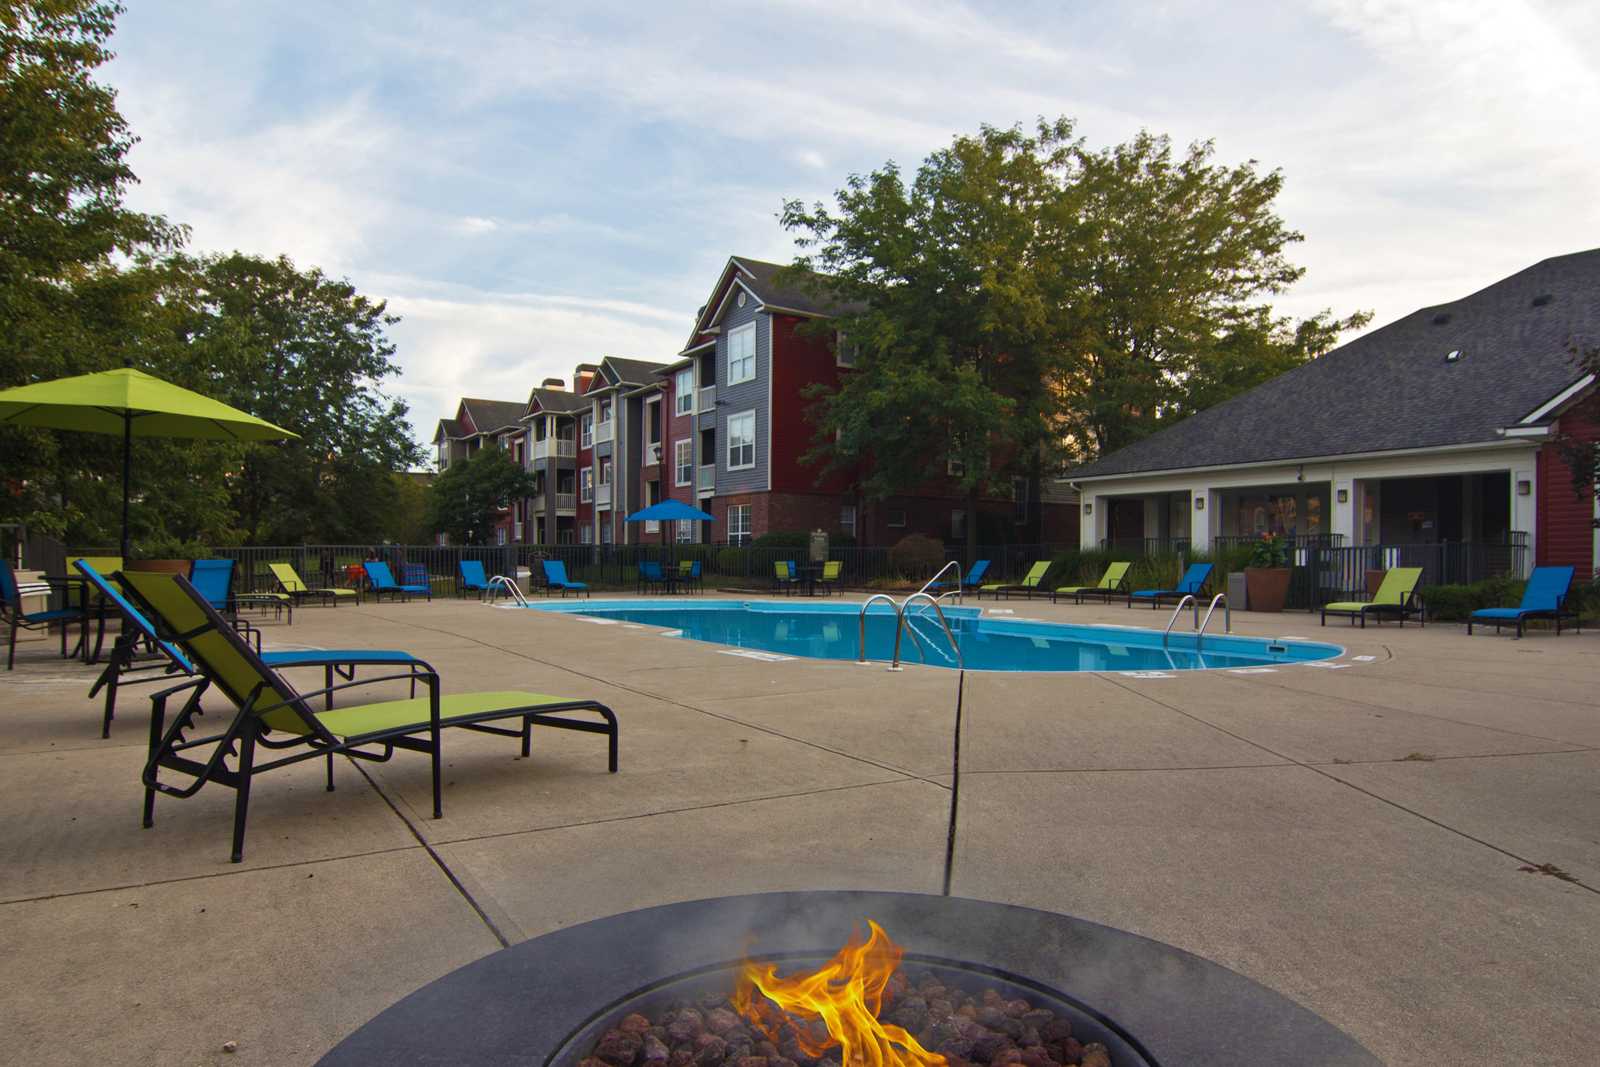  Poolside with Firepit and Sundeck at River Oaks Apartments